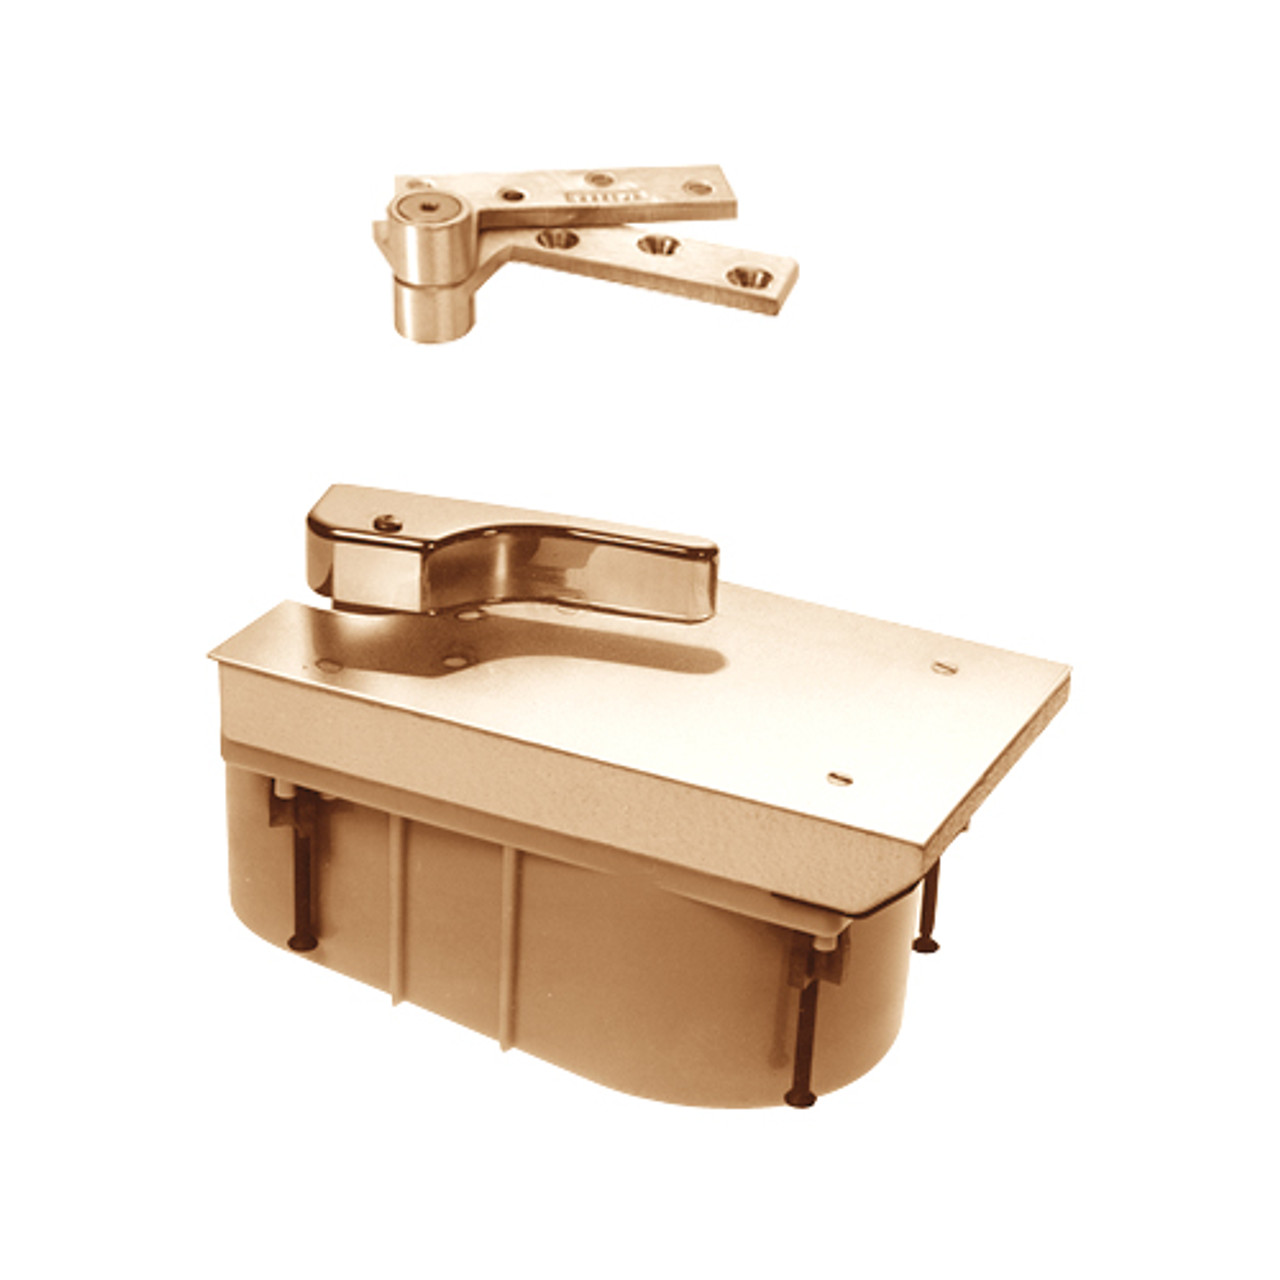 Q27-105S-CWF-LH-612 Rixson 27 Series Heavy Duty Quick Install Offset Hung Floor Closer in Satin Bronze Finish